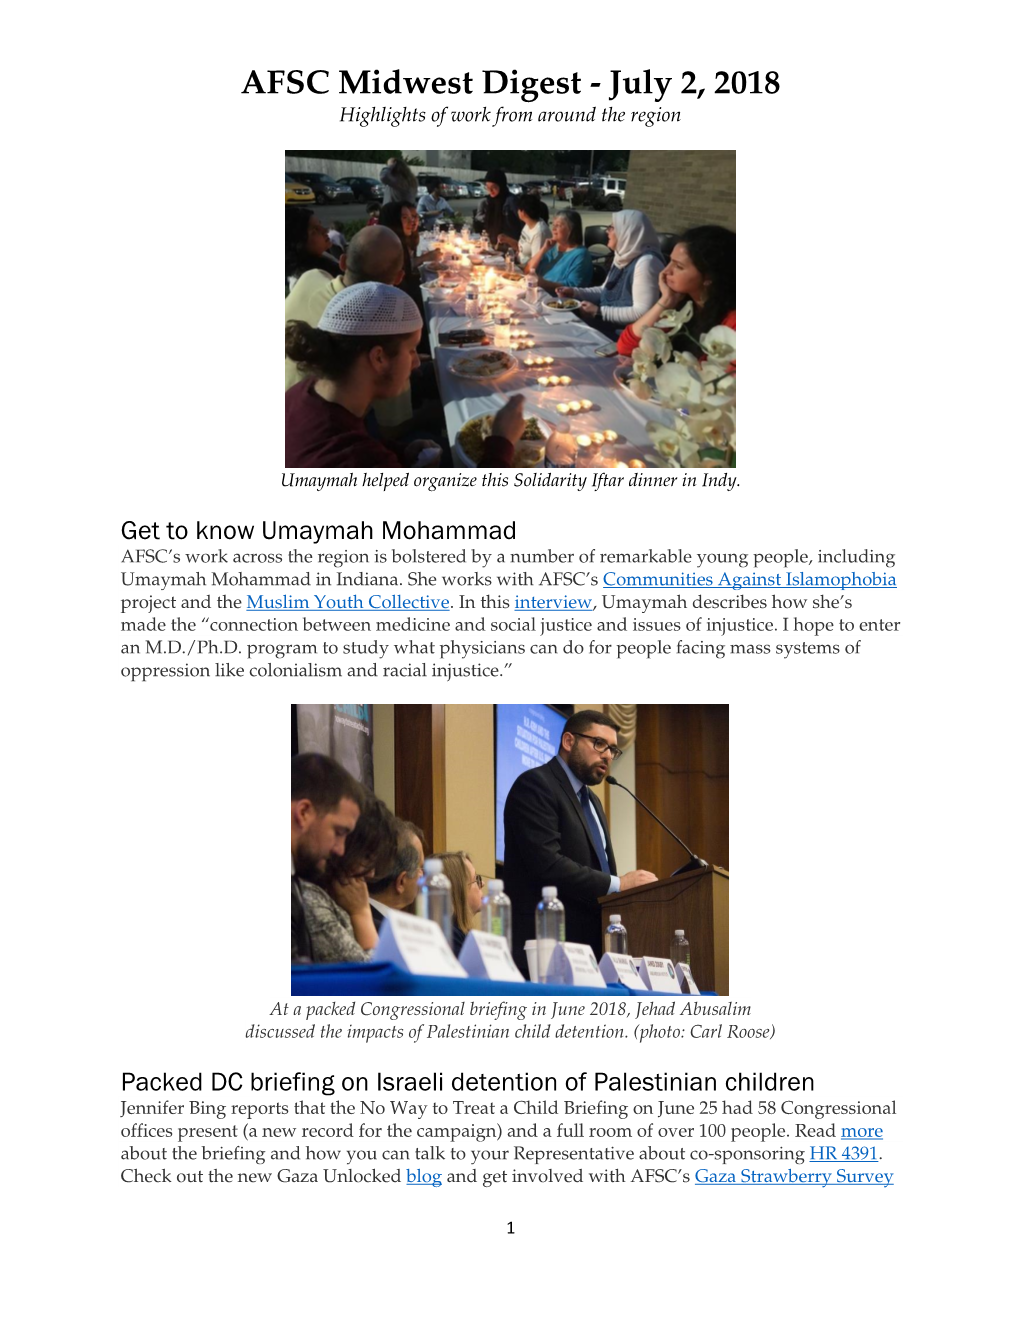 AFSC Midwest Digest - July 2, 2018 Highlights of Work from Around the Region